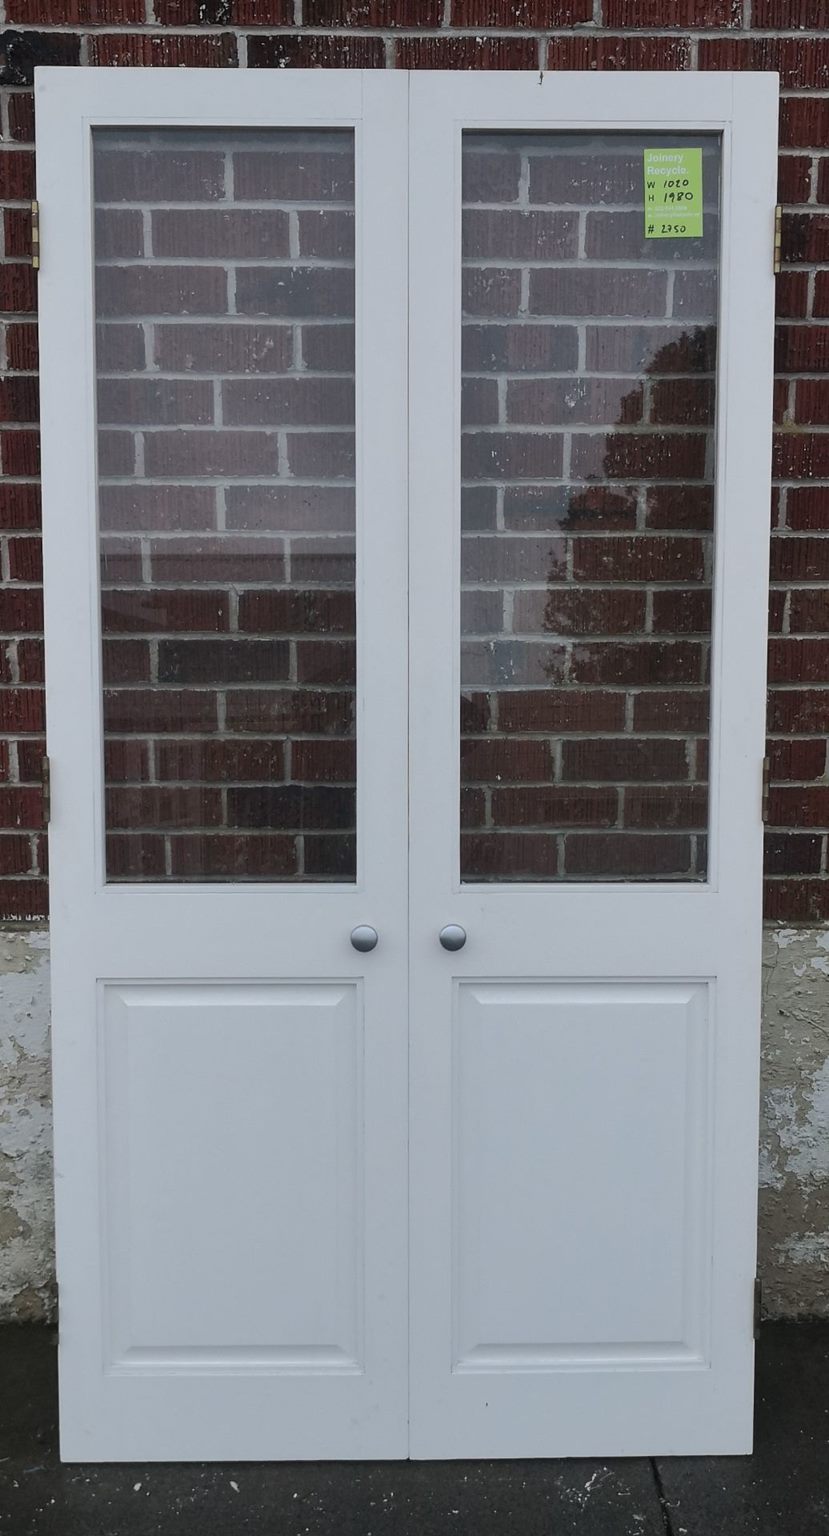 VILLA Style Internal Wooden French Doors 1020 W x 1980 H  [#2750] Joinery Recycle